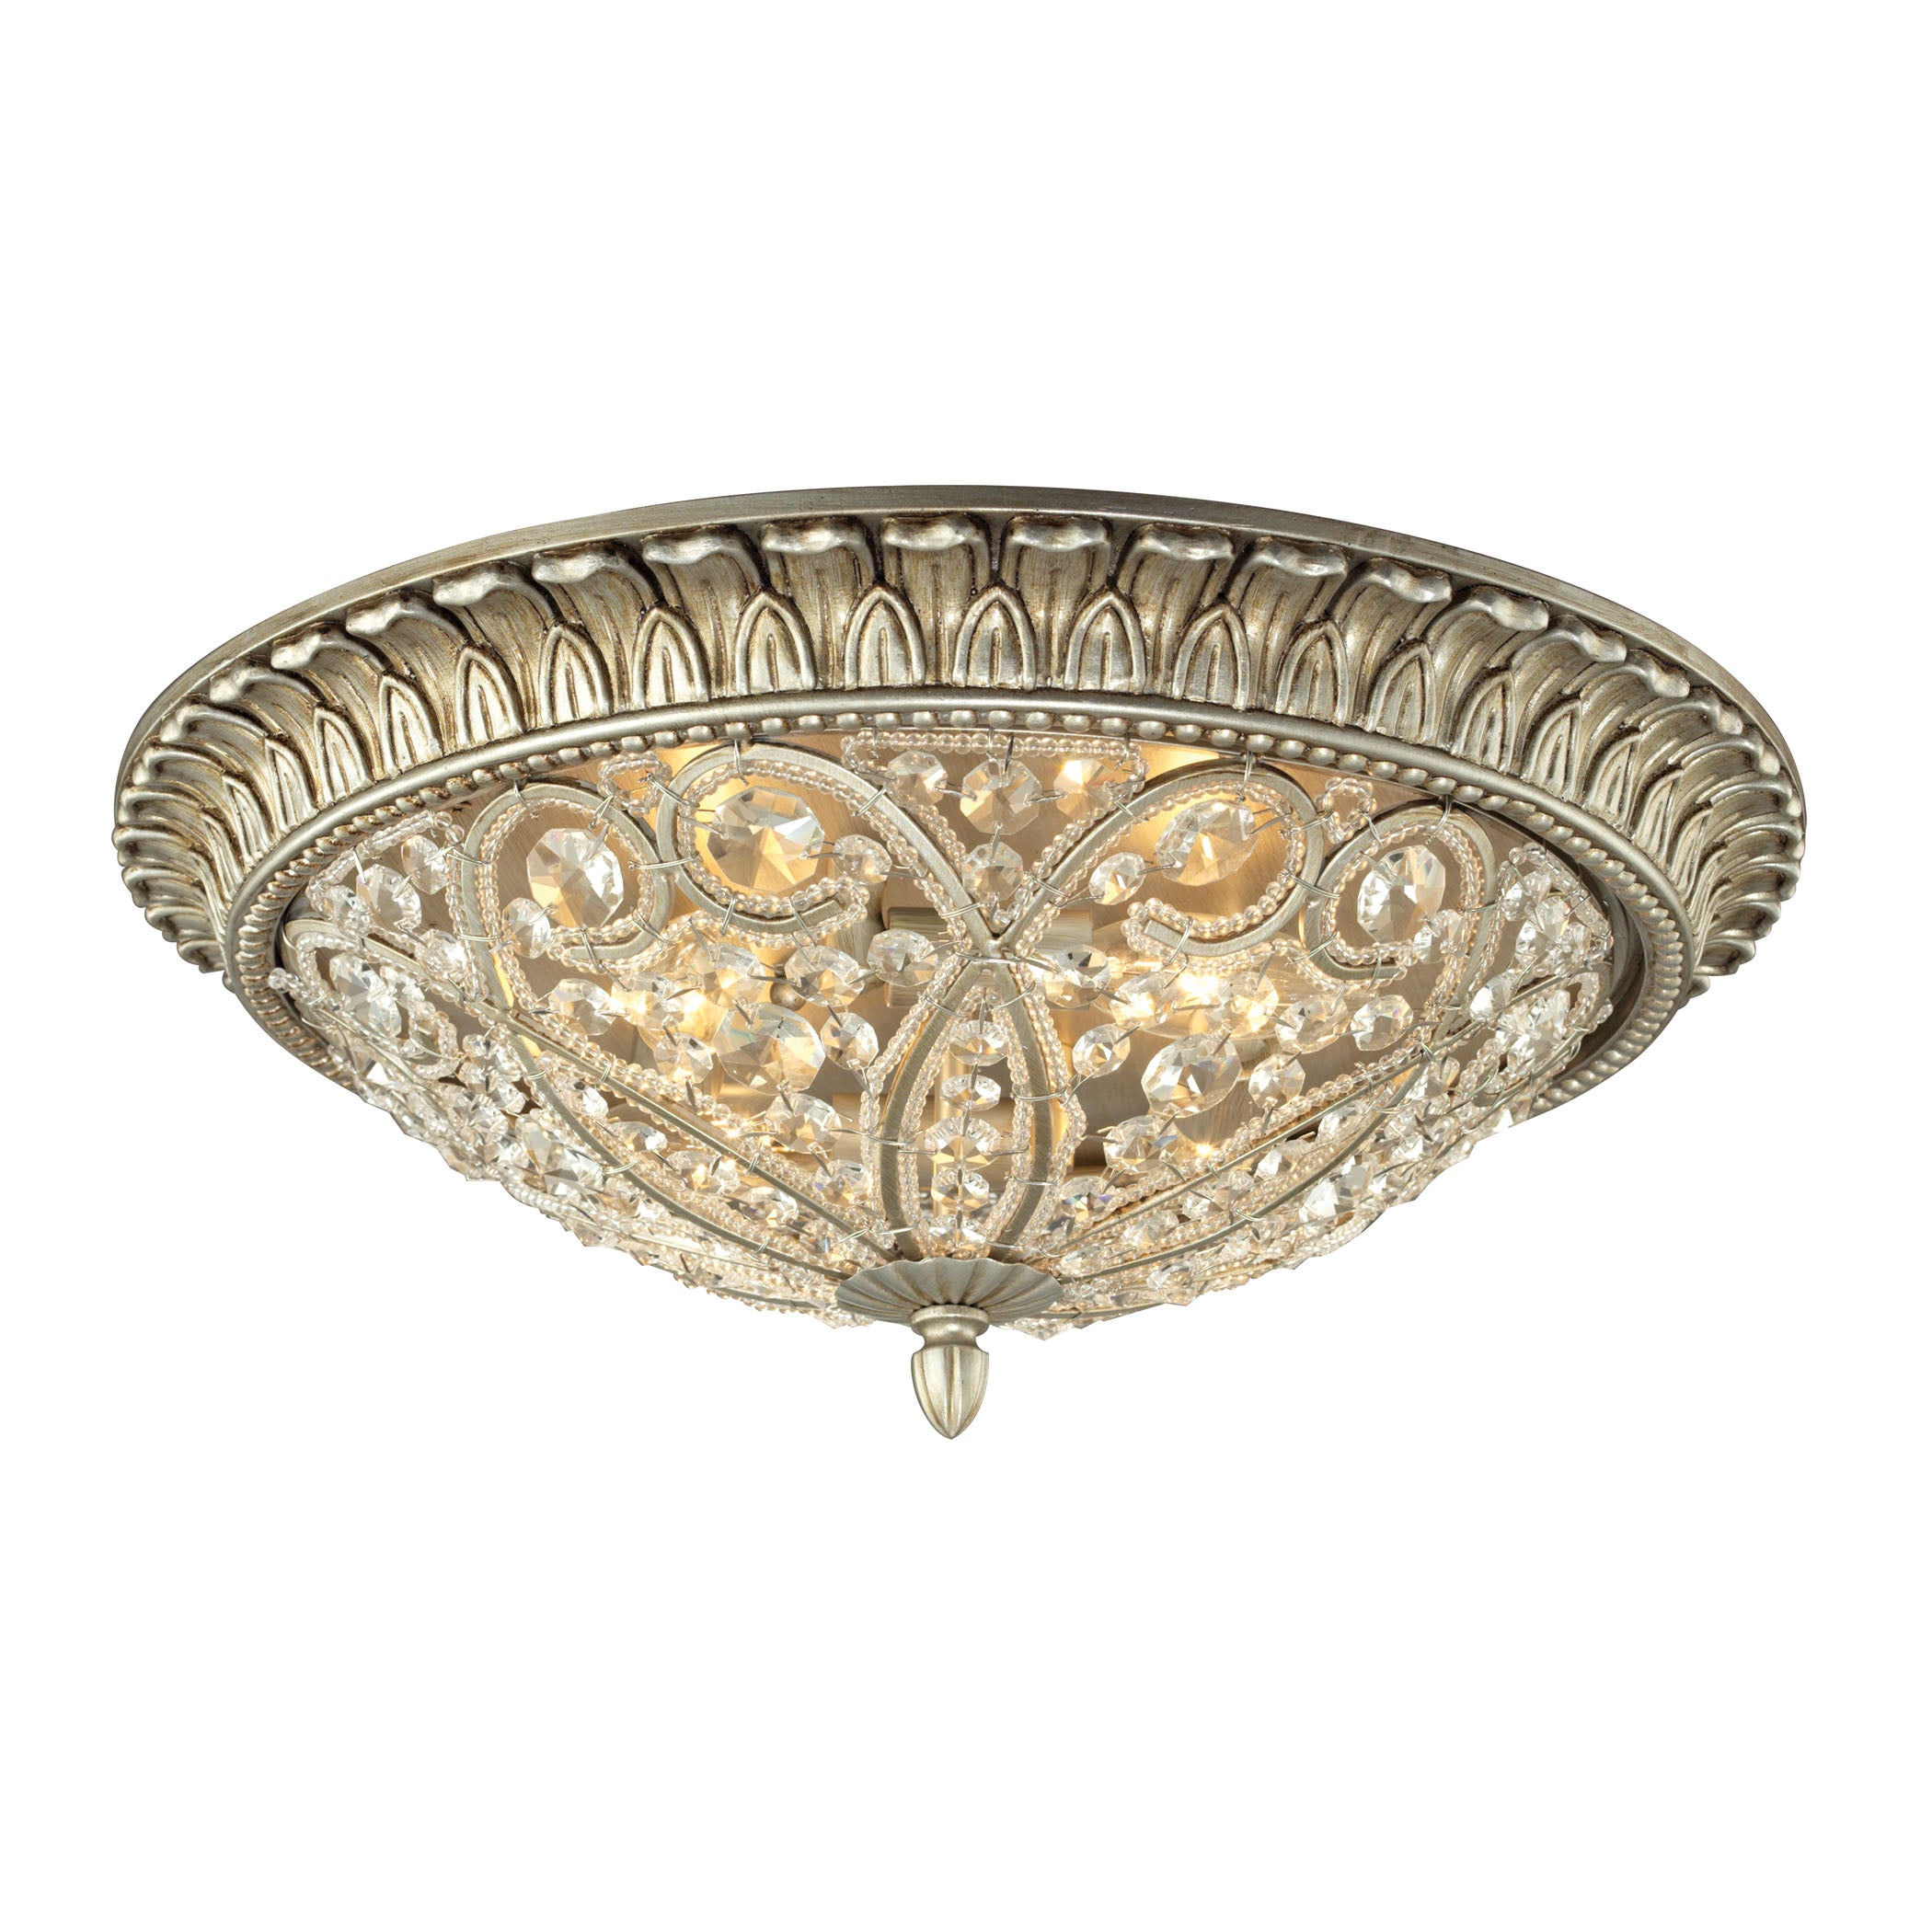 ELK Lighting 11694/4 Andalusia 4-Light Flush Mount in Aged Silver with Clear Crystal and Beaded Glass Diffuser